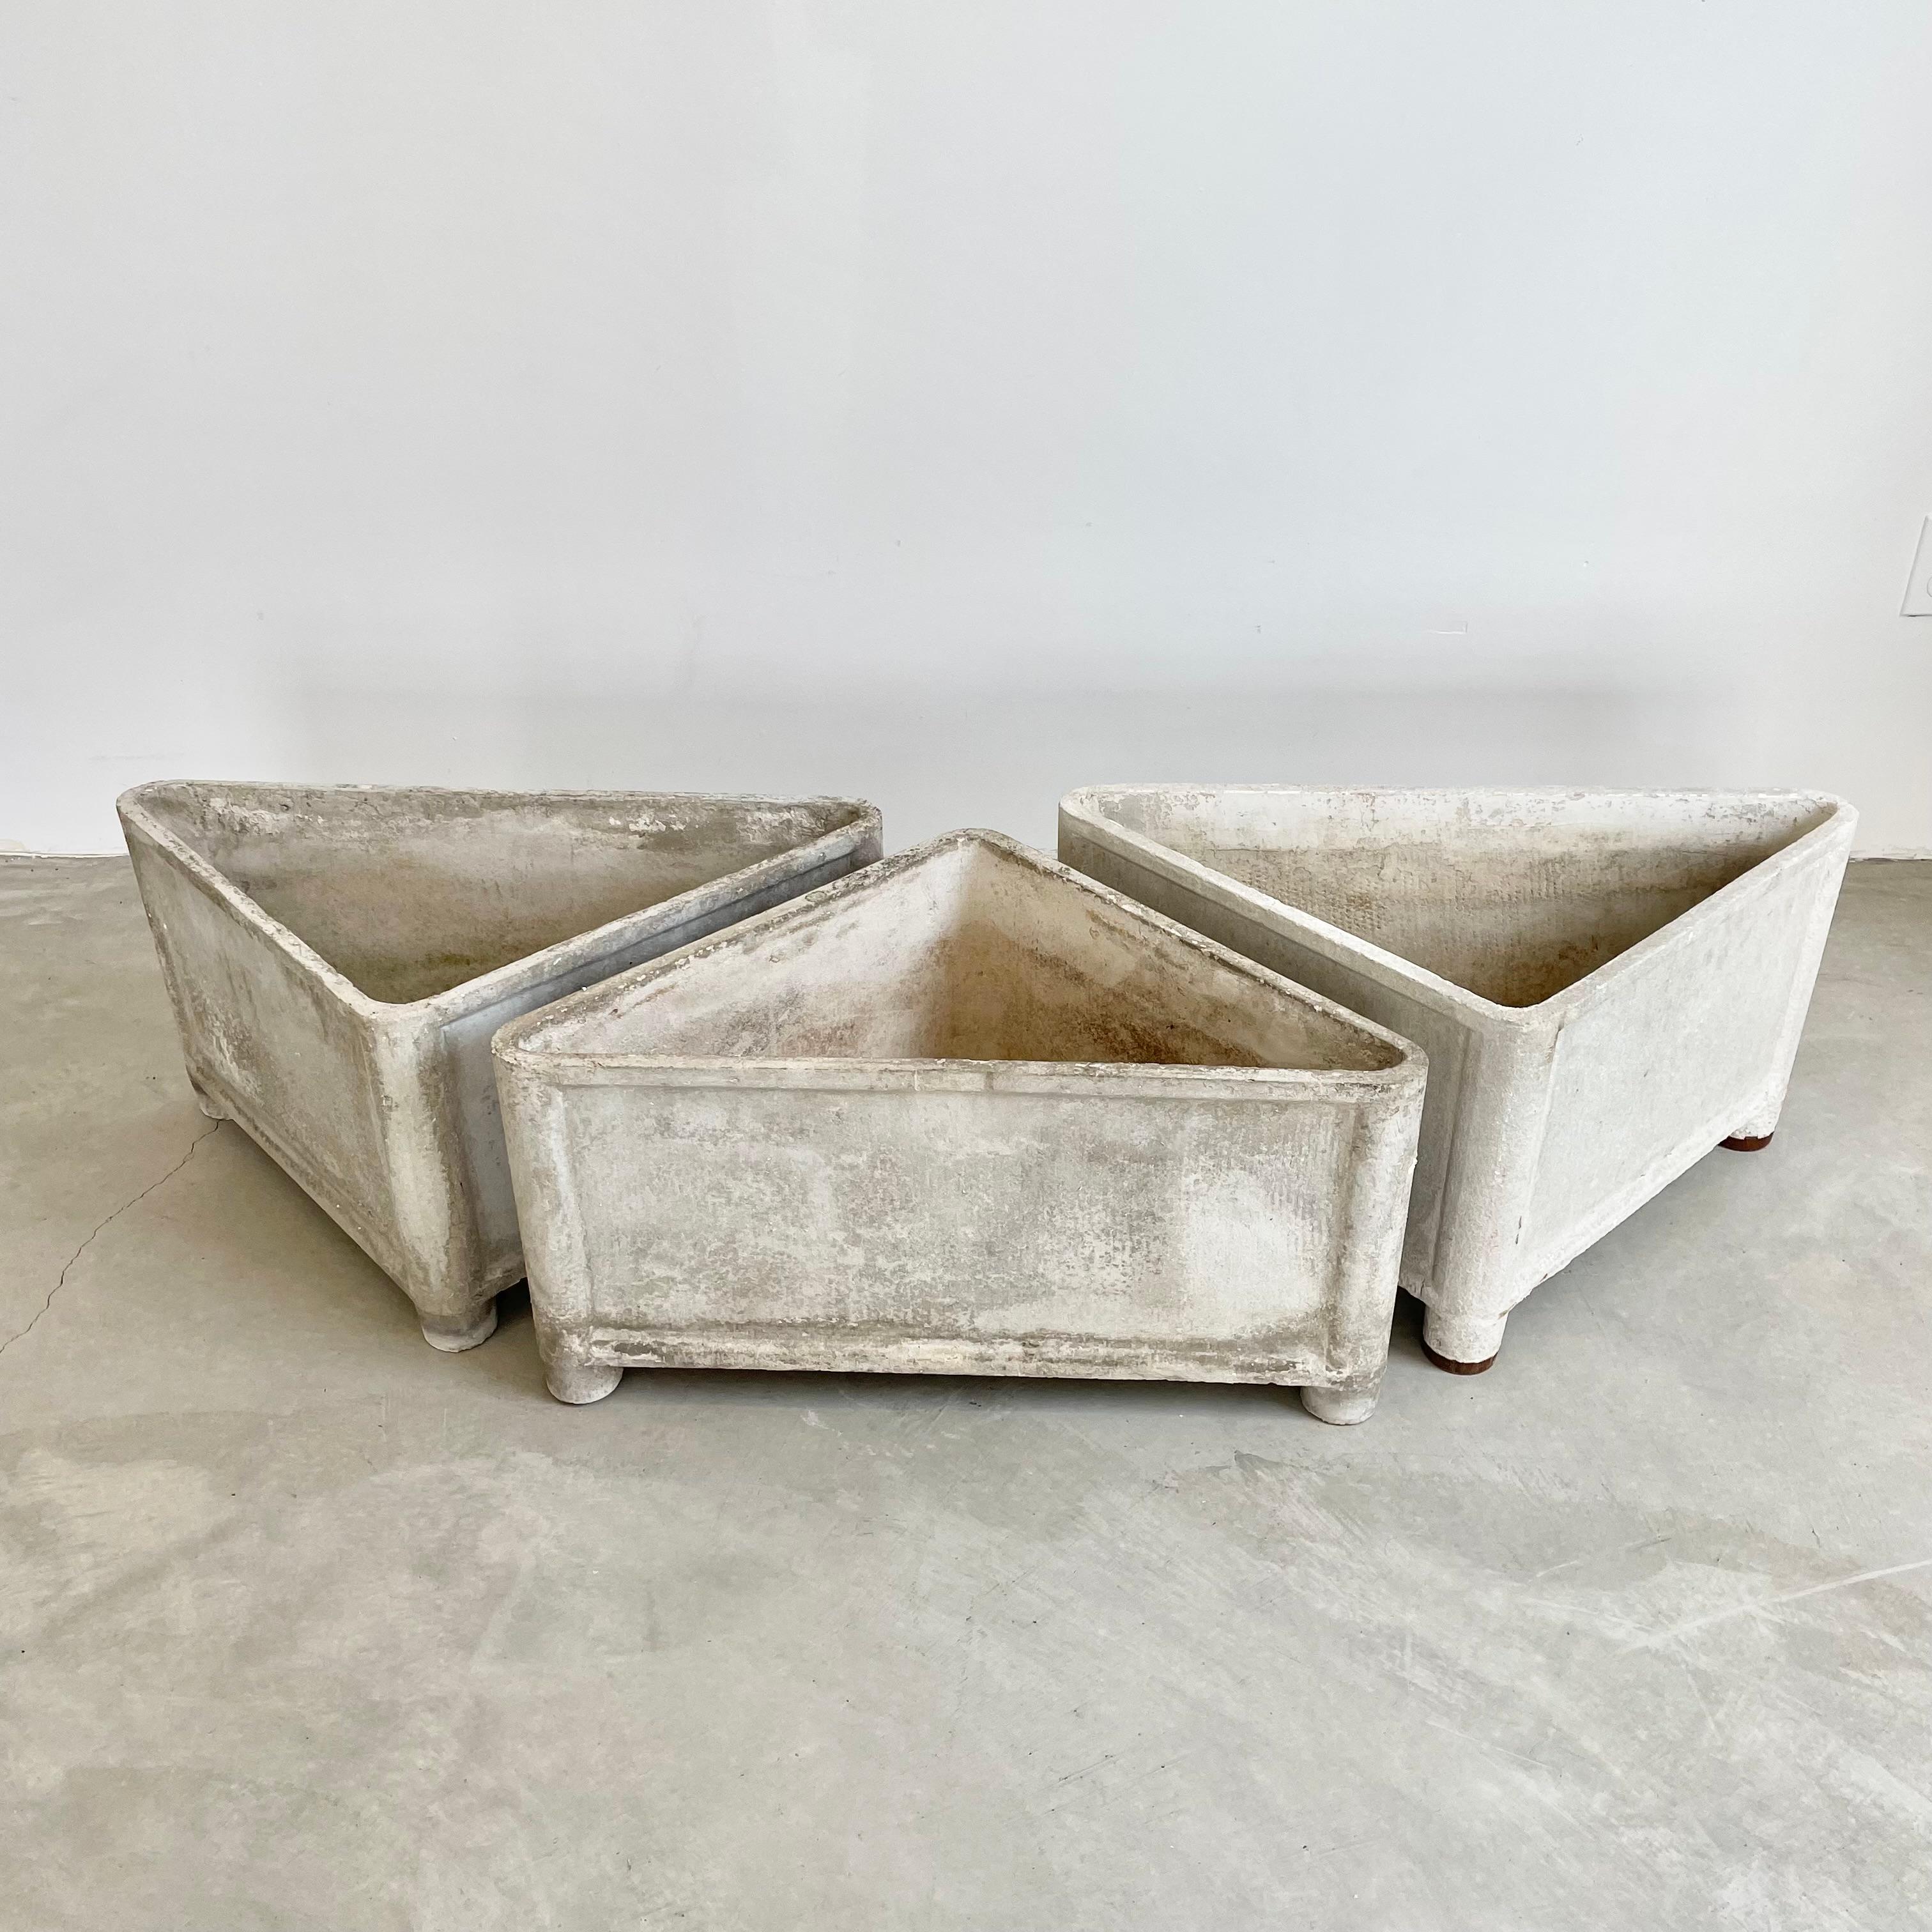 Modern Triangular Footed Planters by Willy Guhl, 1960s For Sale